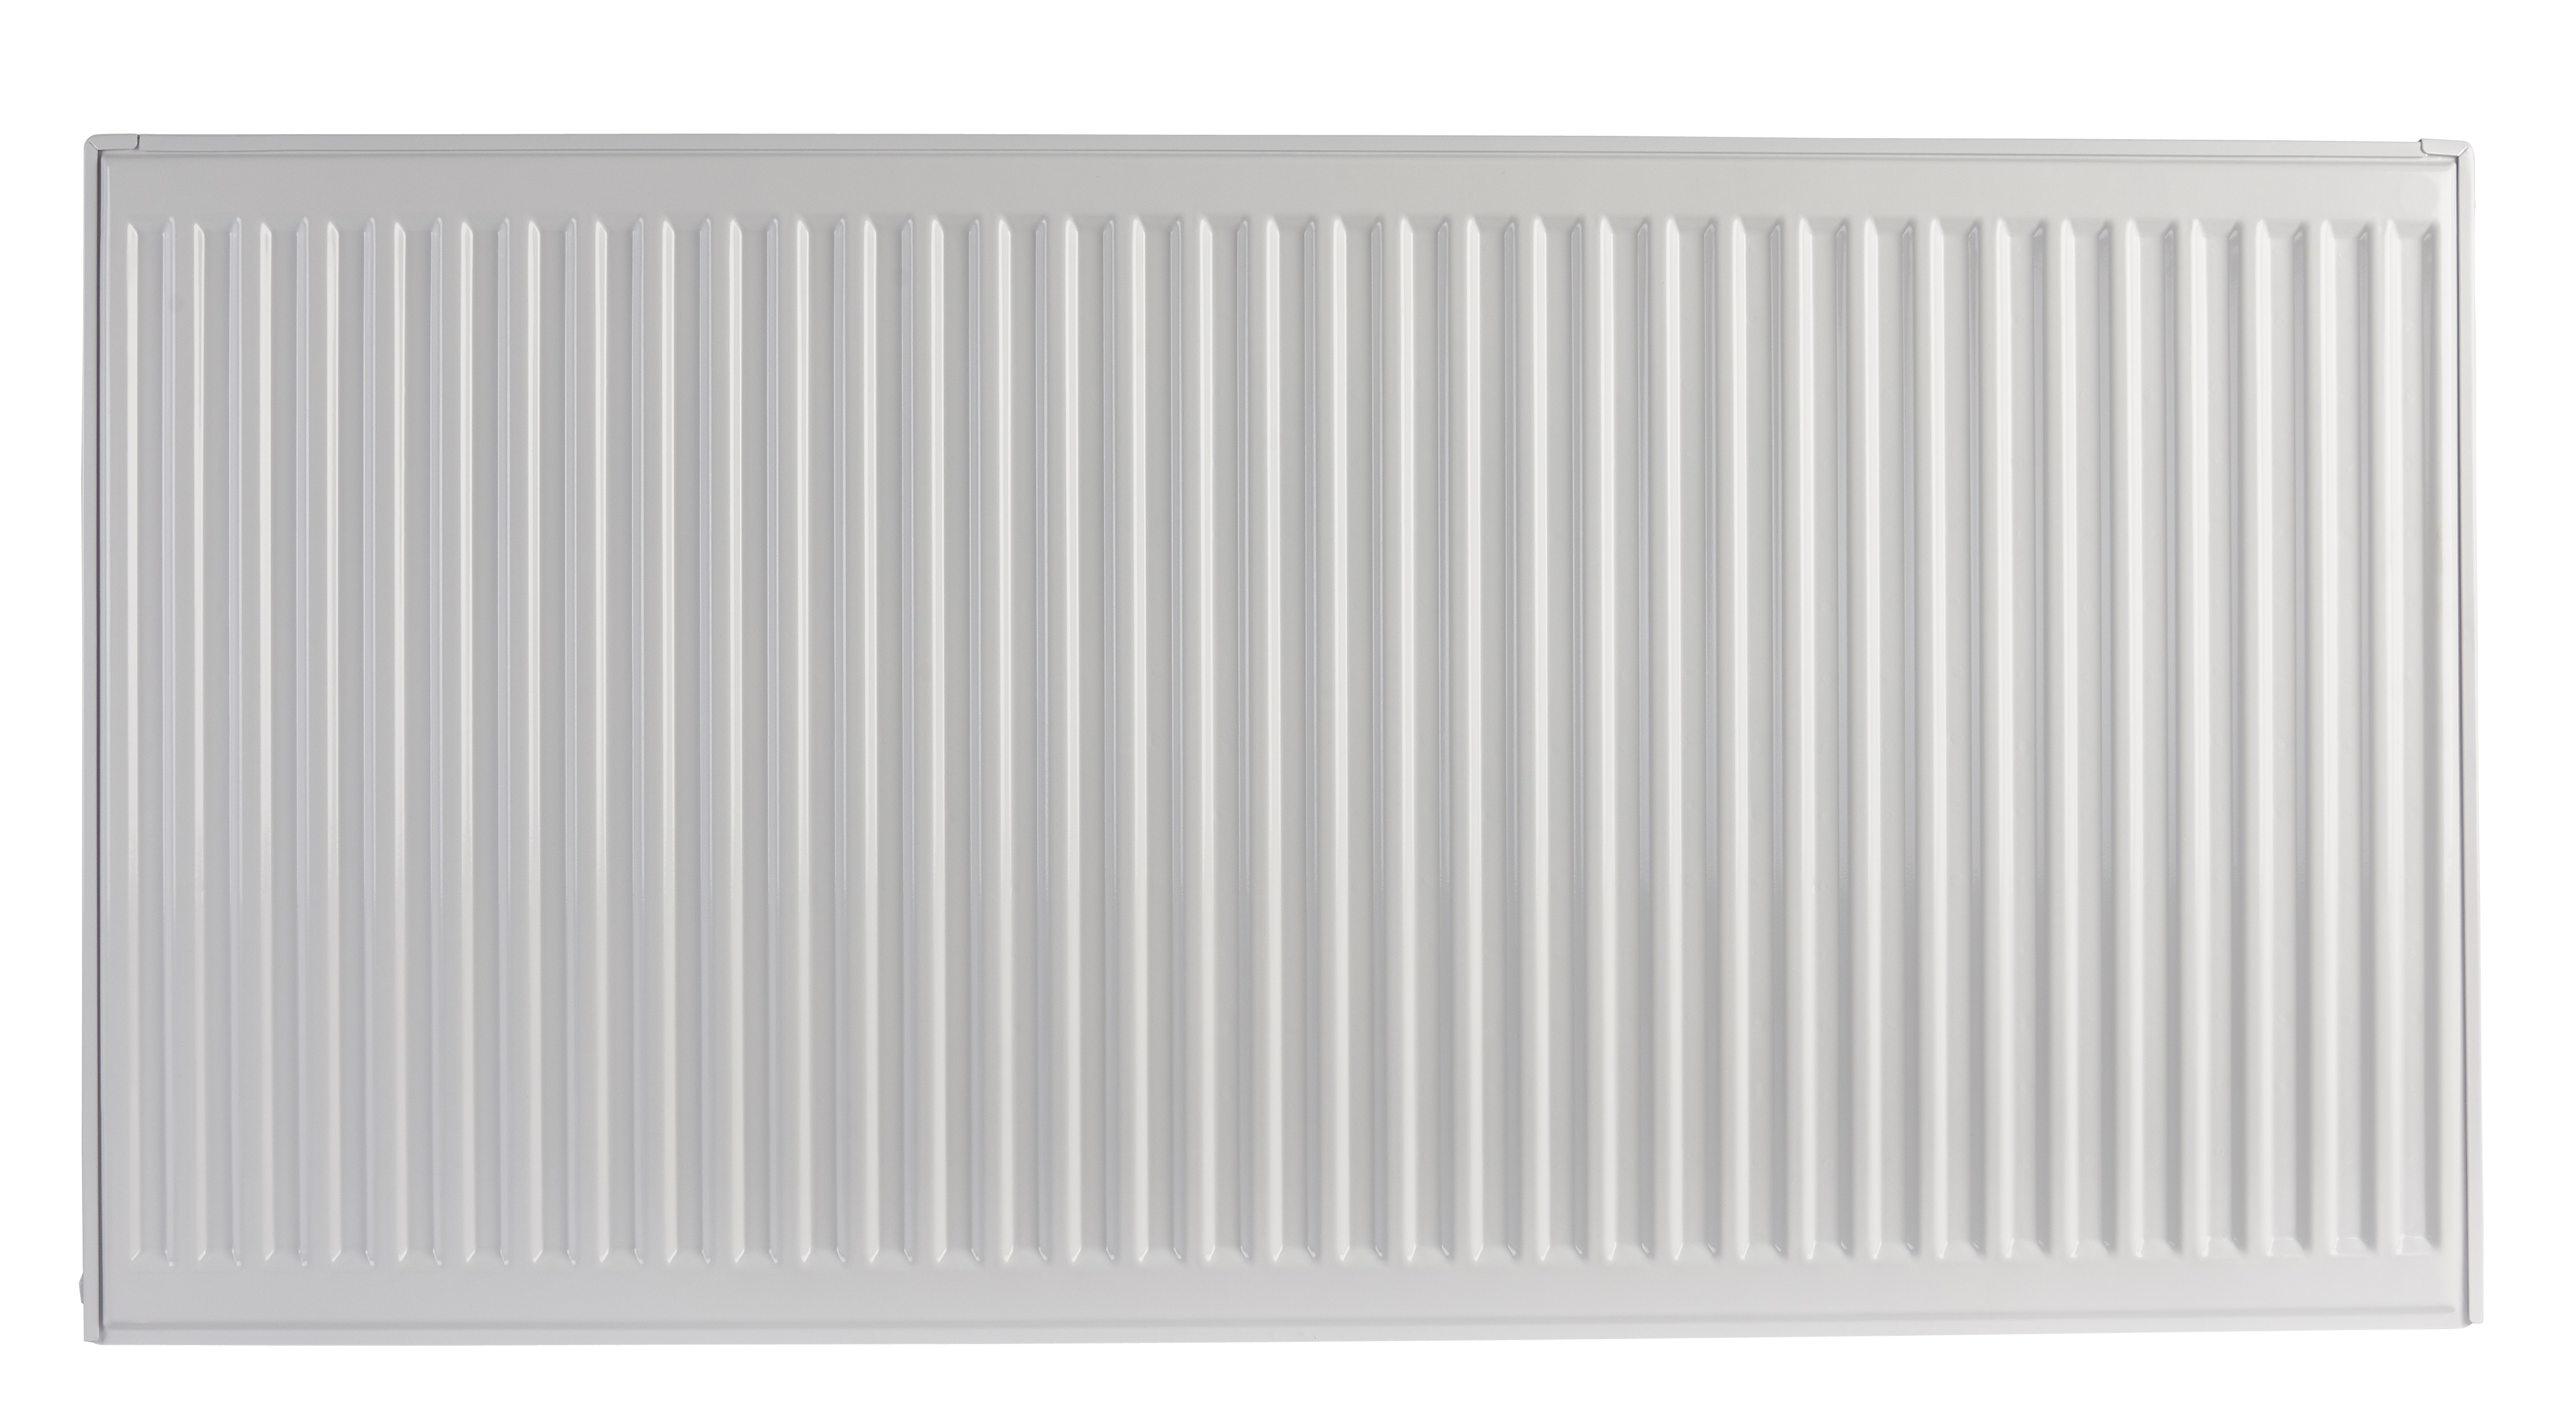 Homeline by Stelrad Type 21 Double Panel Plus Single Convector Radiator - 400 x 1000mm